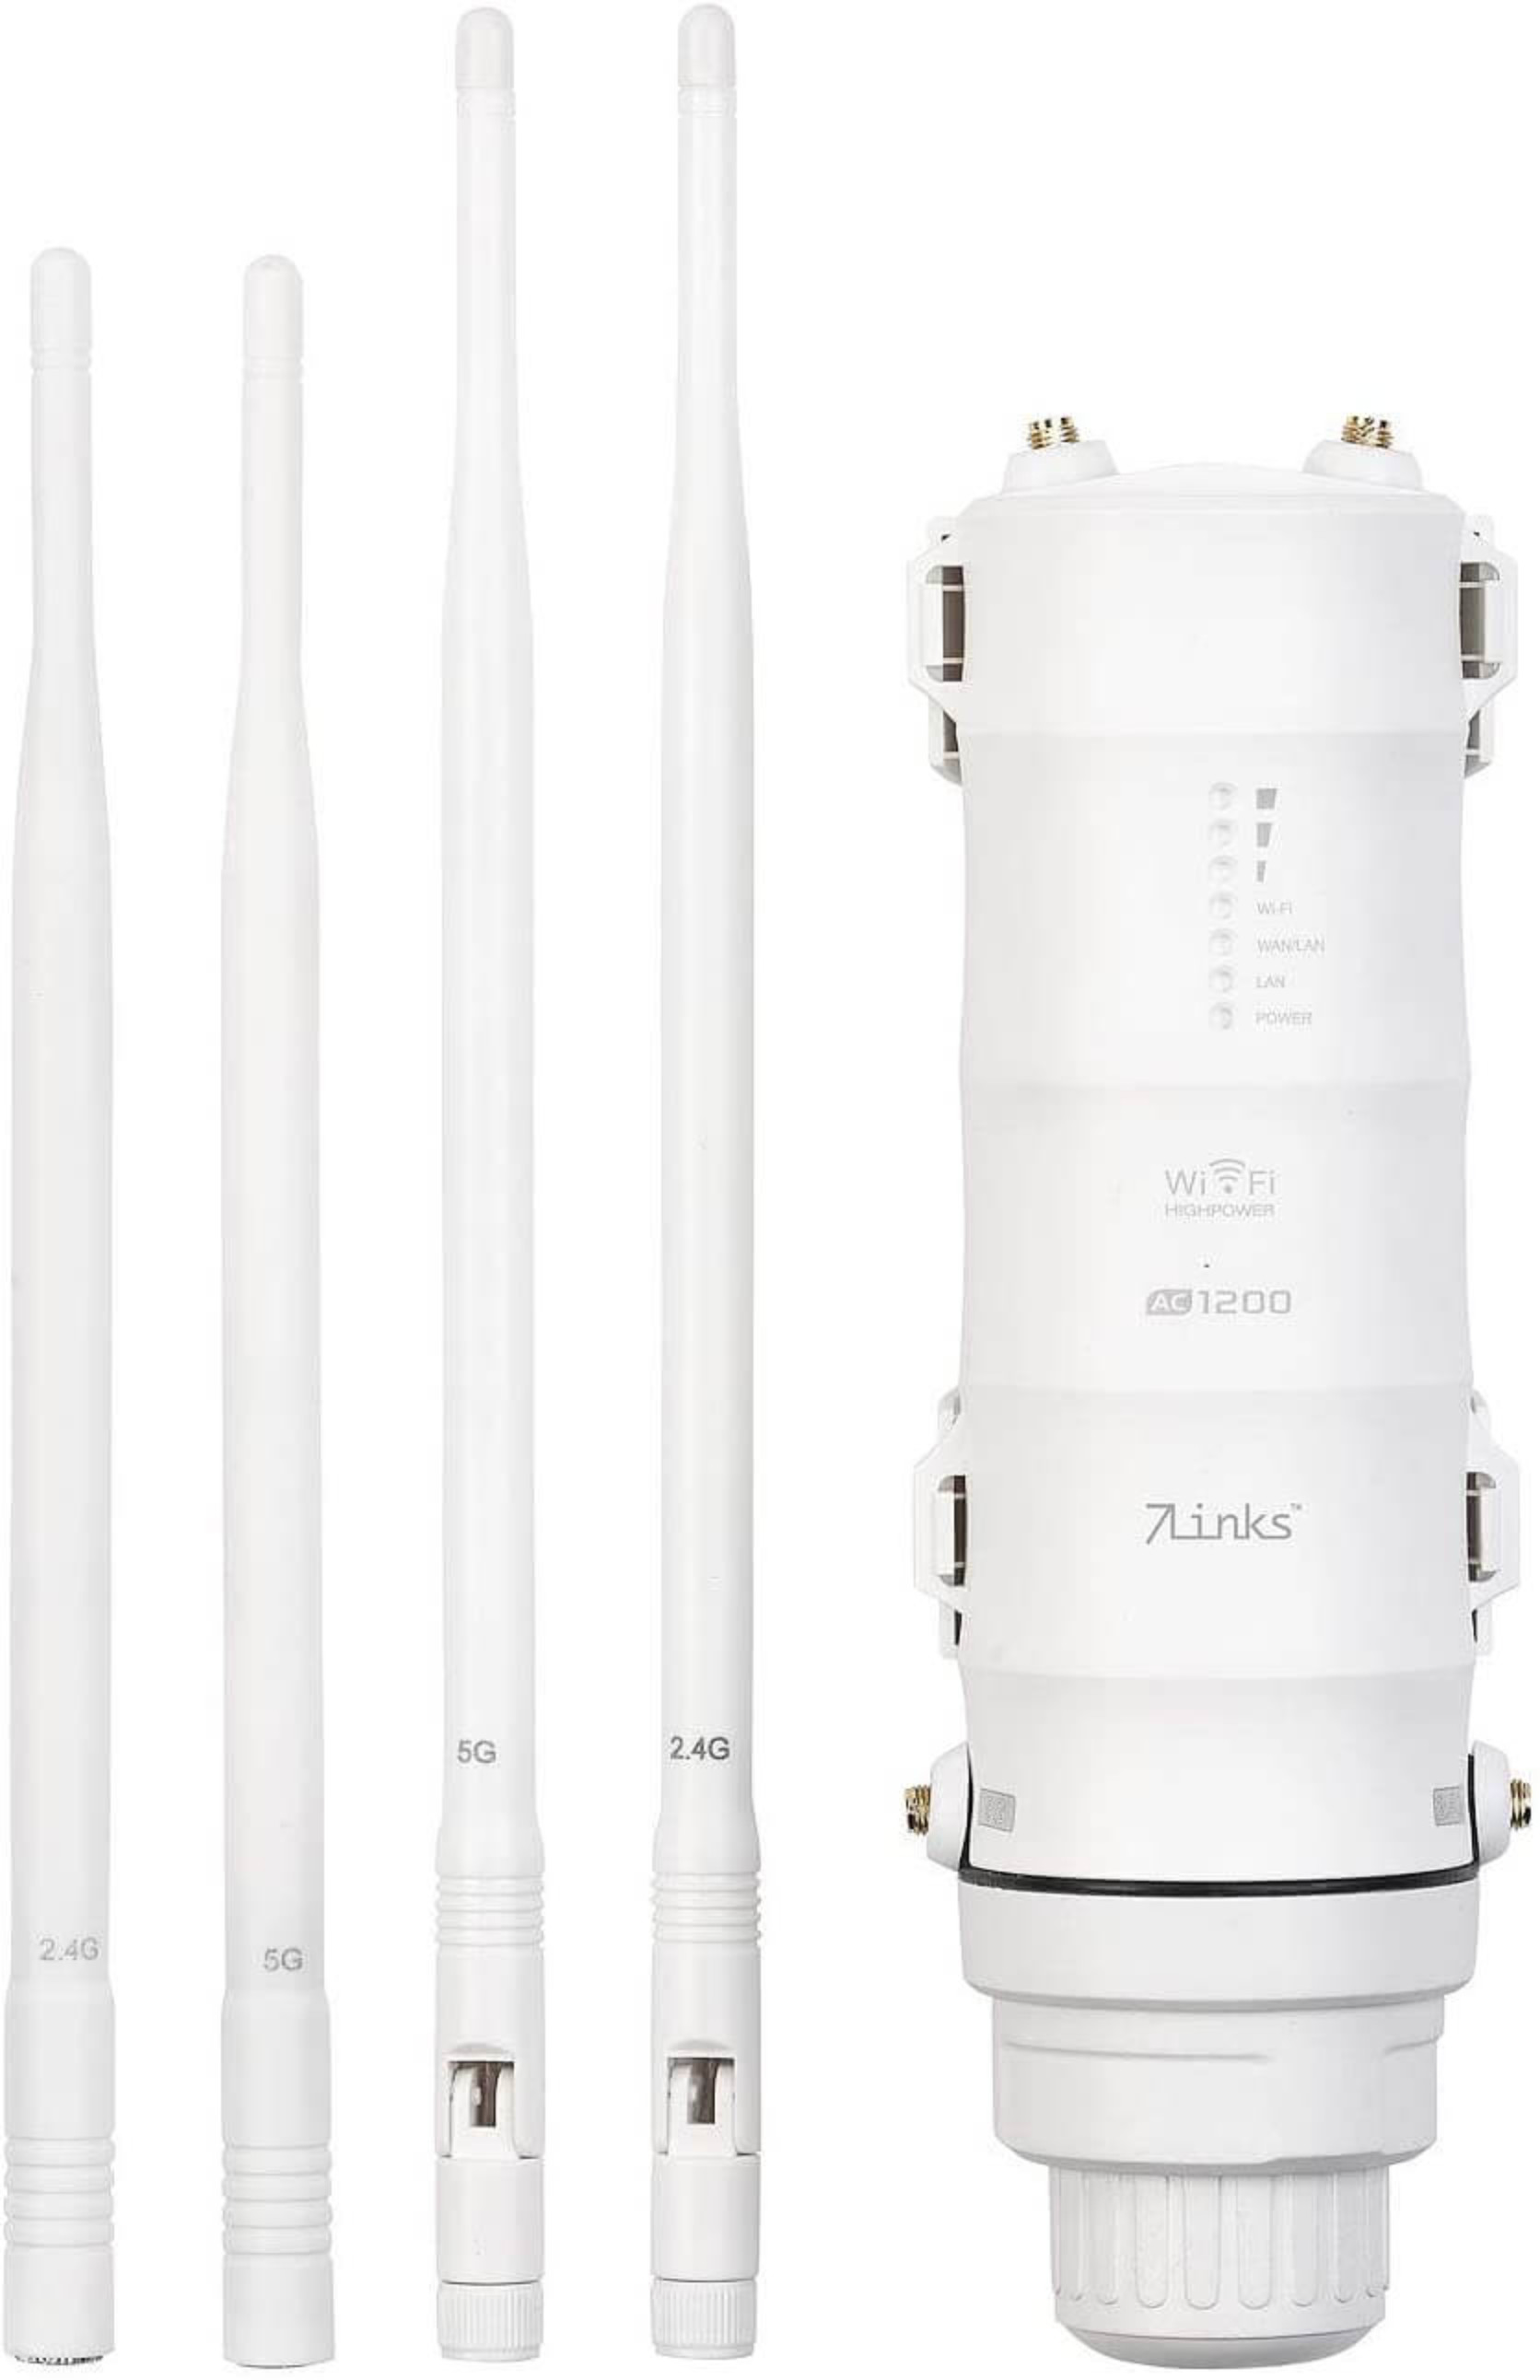 7LINKS WLAN-Repeater Outdoor